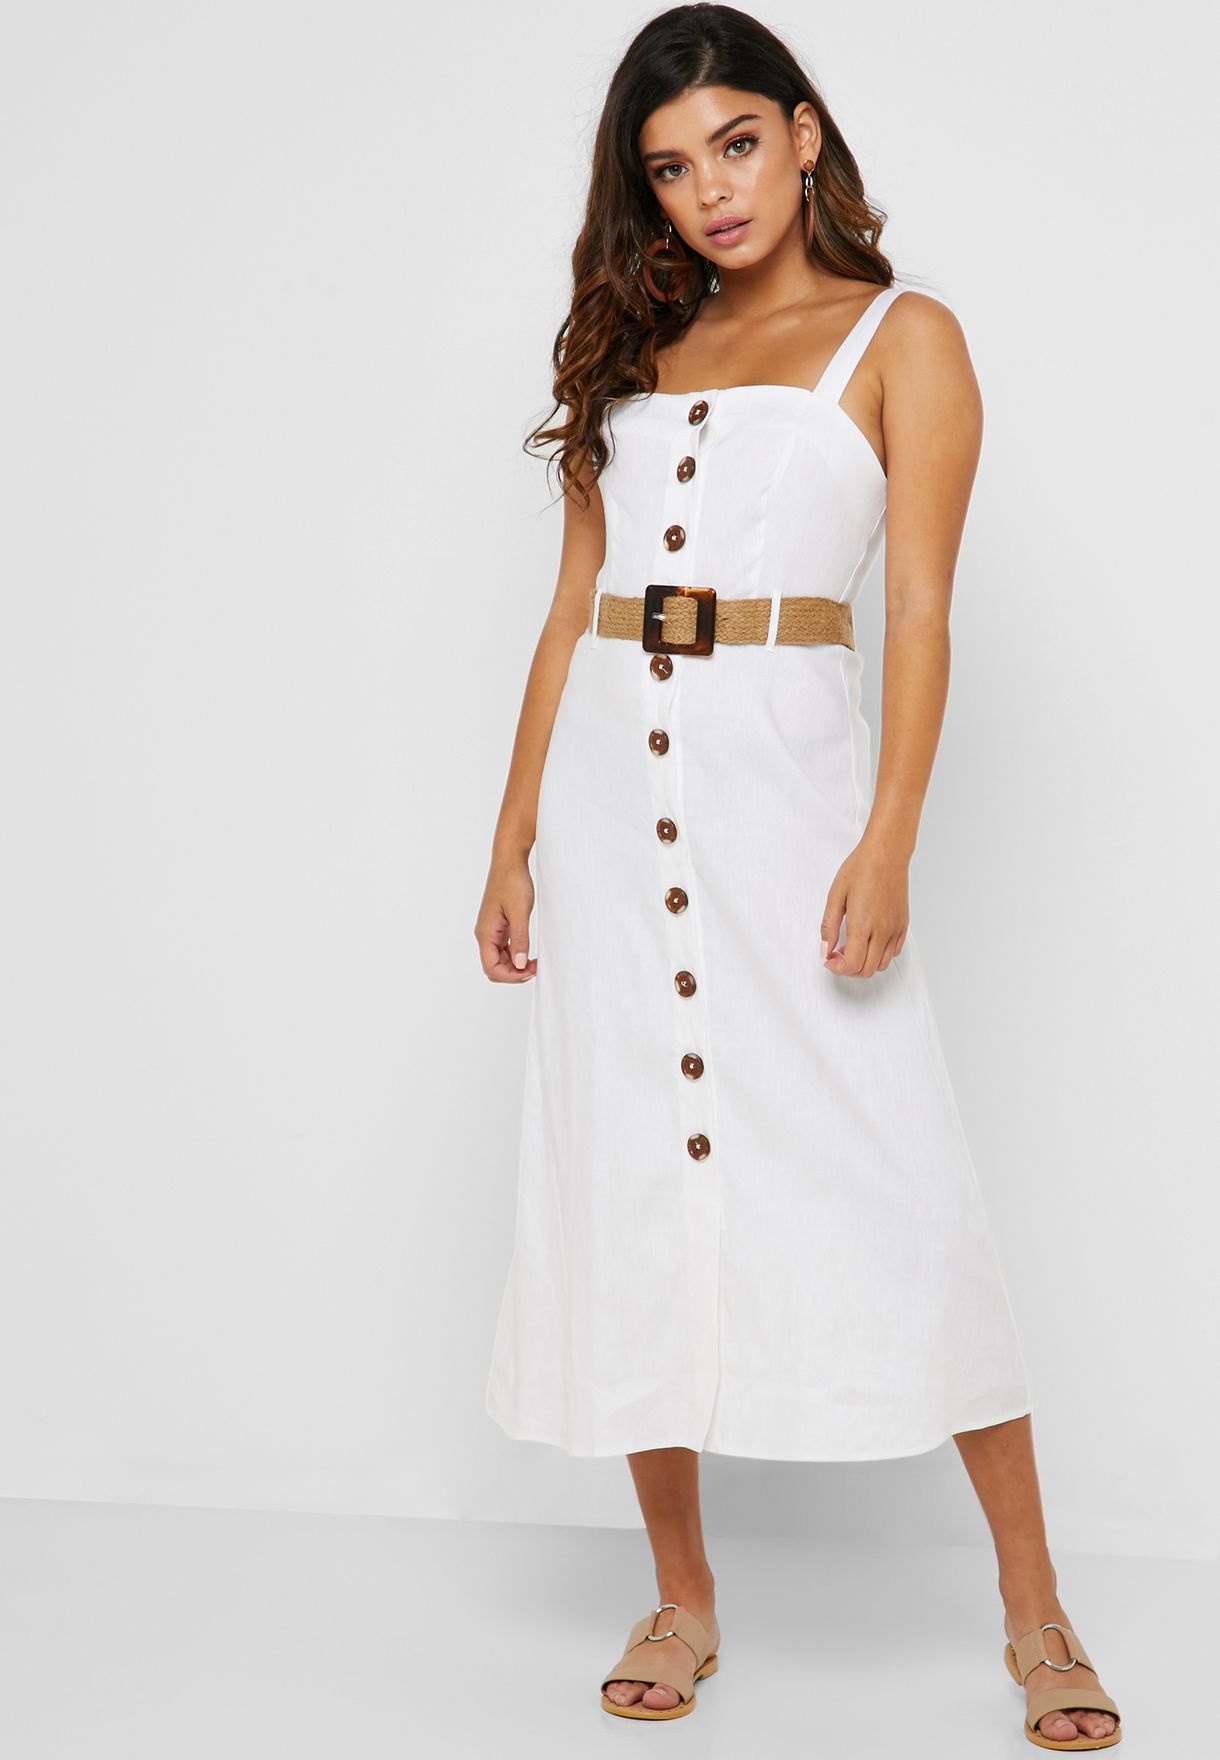 forever 21 white button down dress